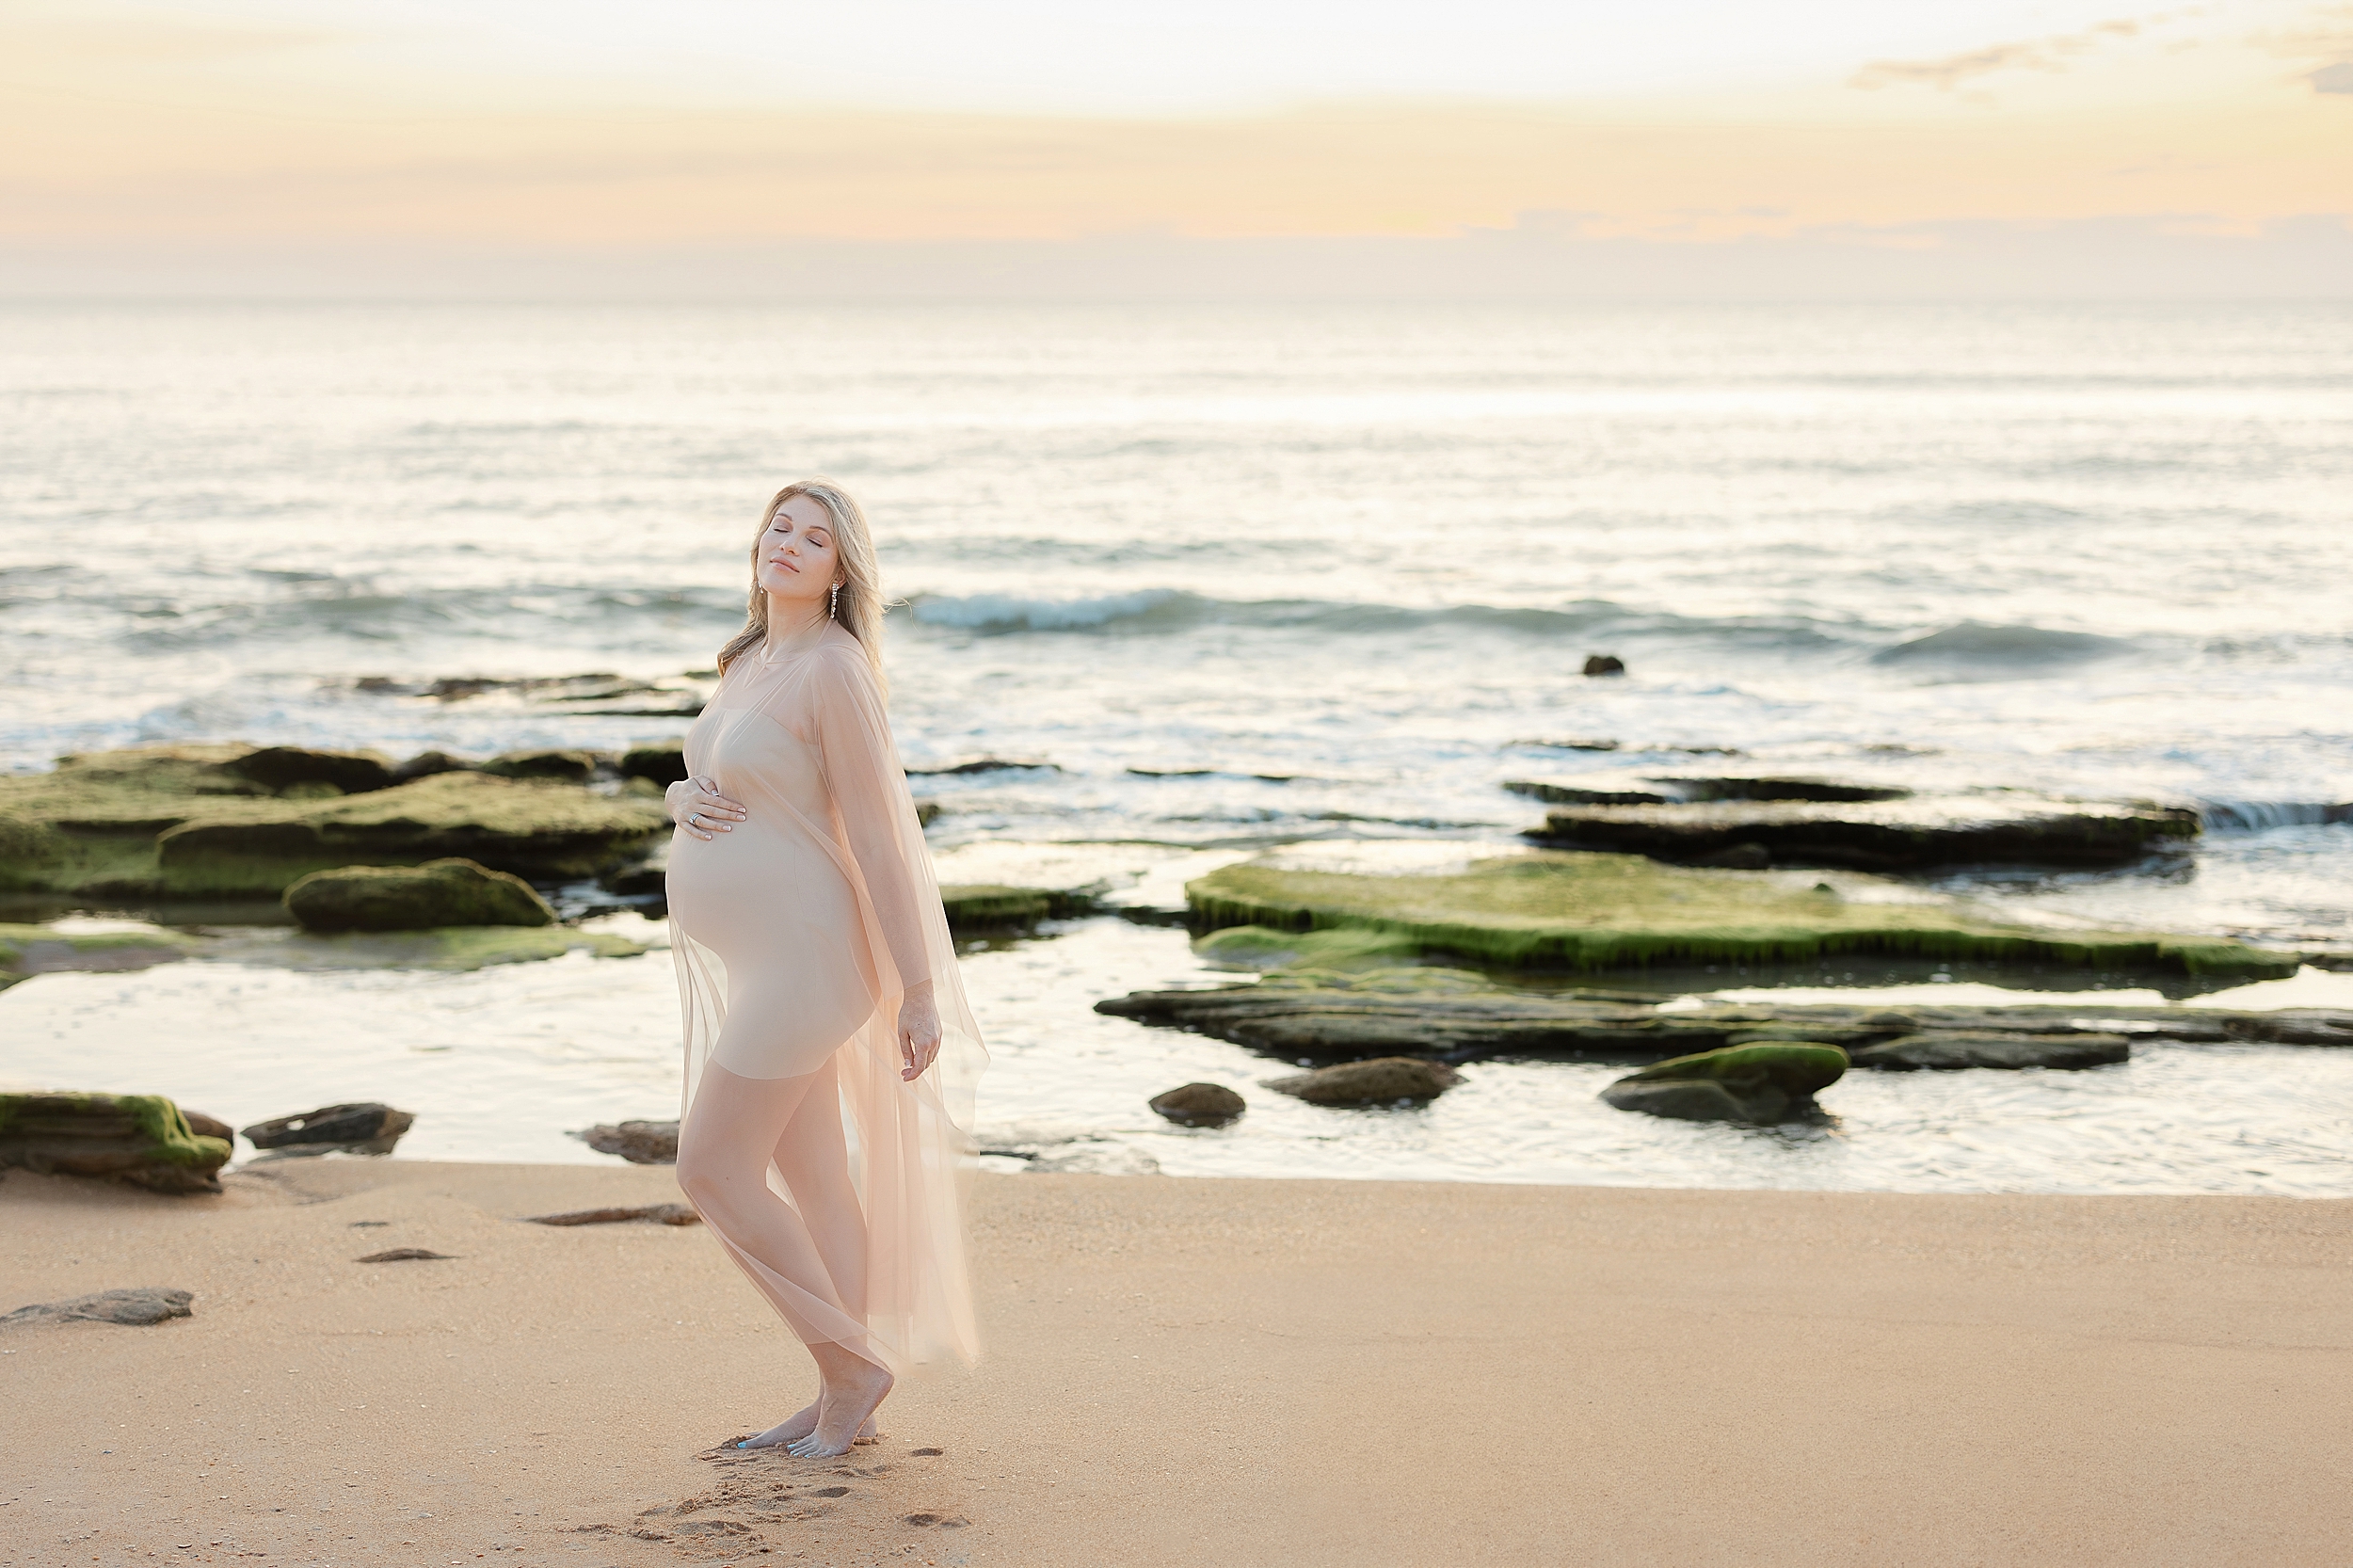 St. Augustine Beach sunrise coastal maternity session with a light and airy look.